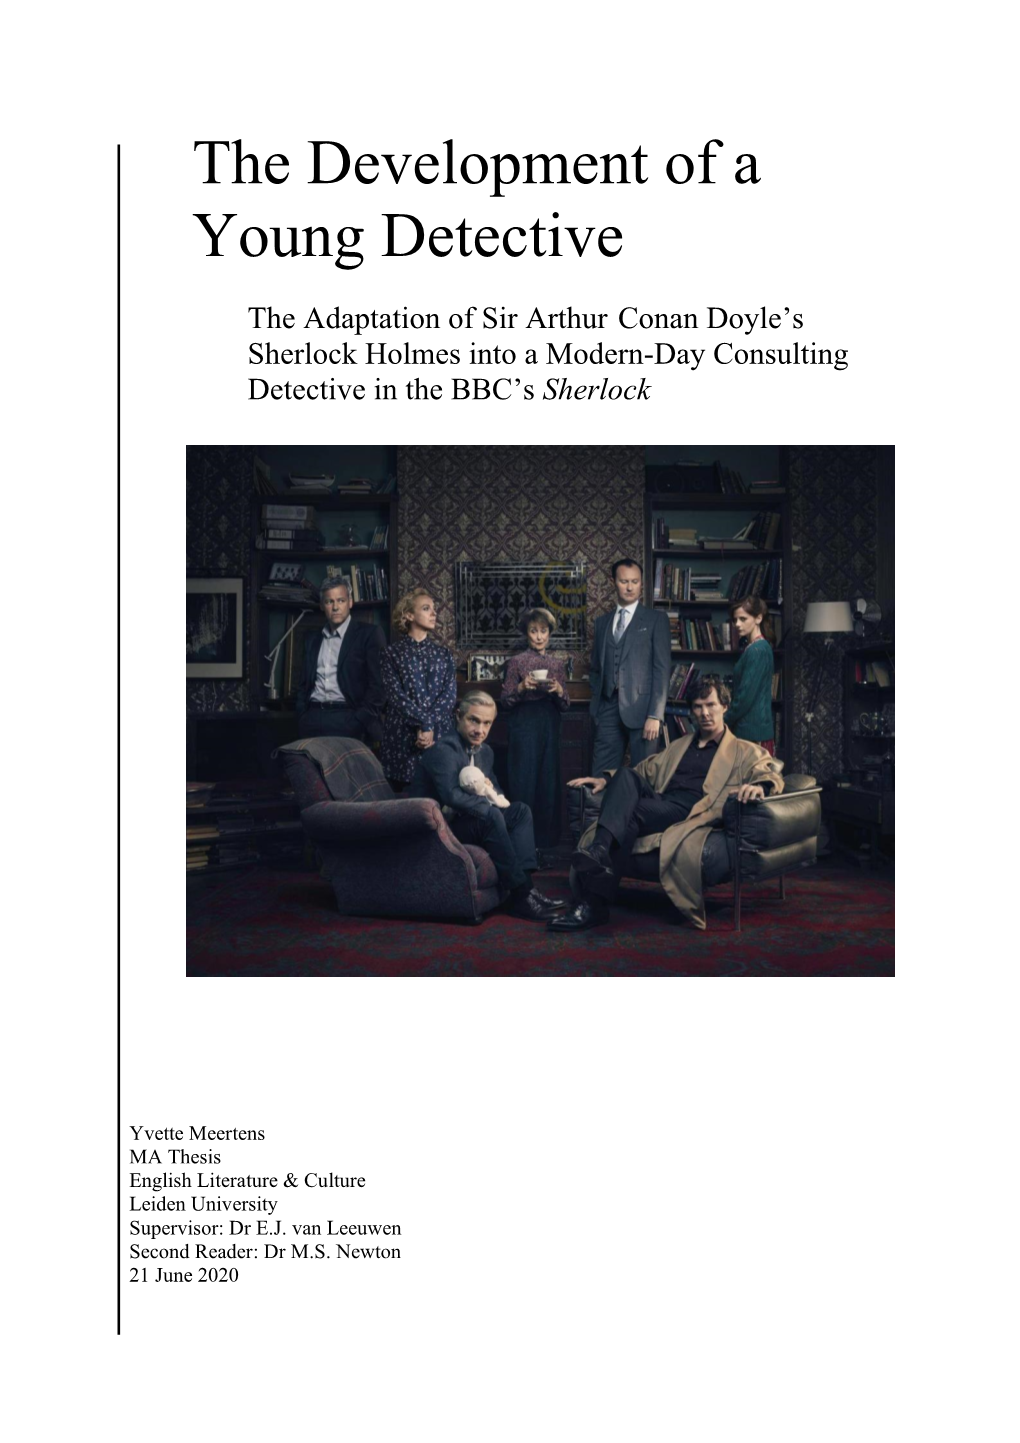 The Development of a Young Detective